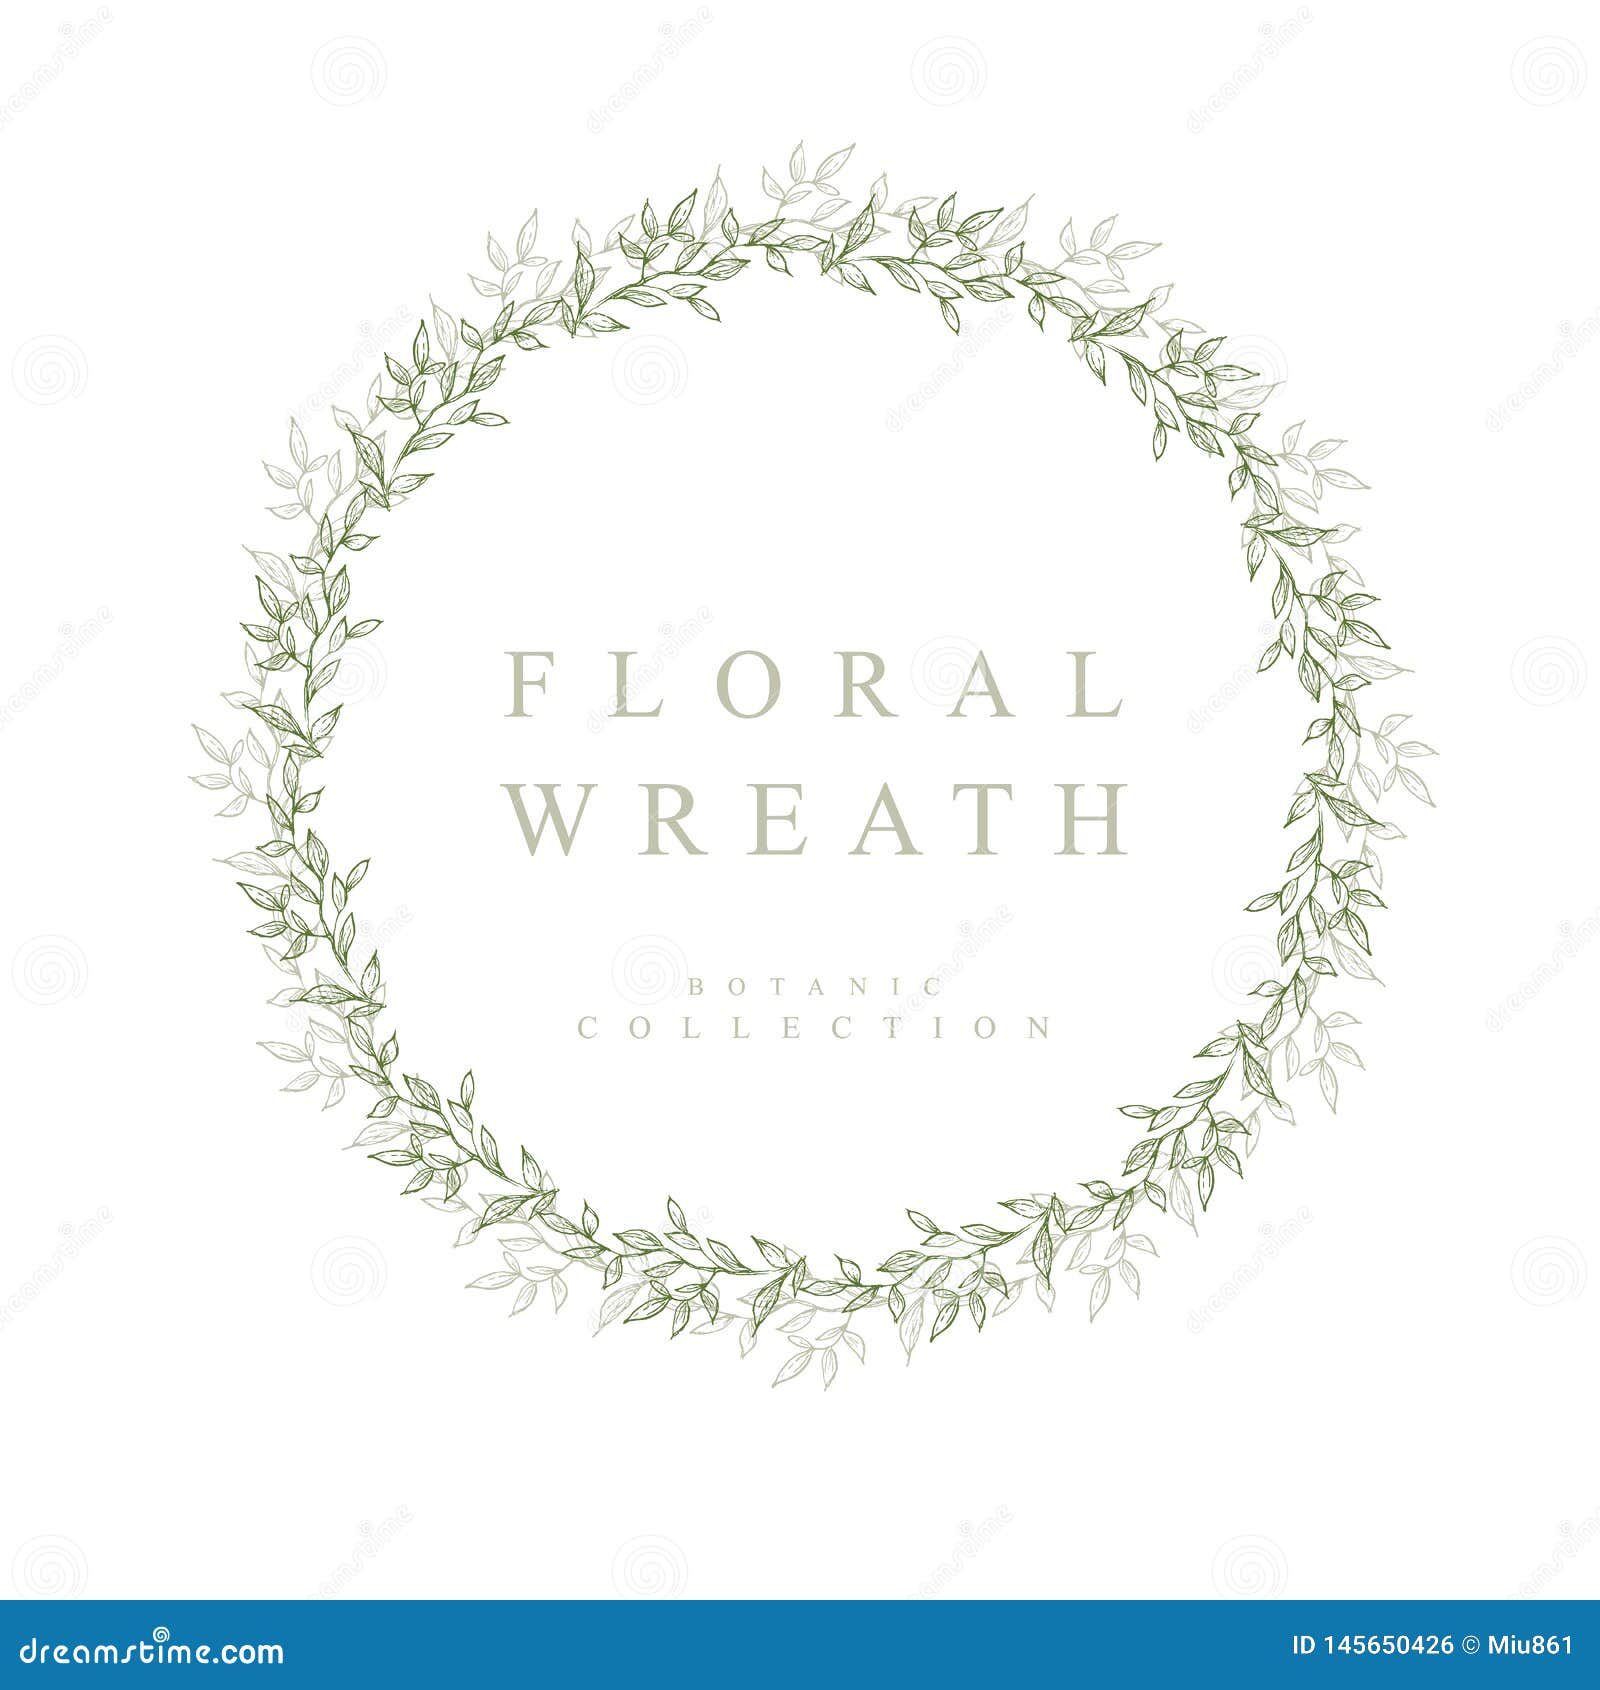 Green Floral Vector Wreath Isolated on a White Background. Hand Drawn ...